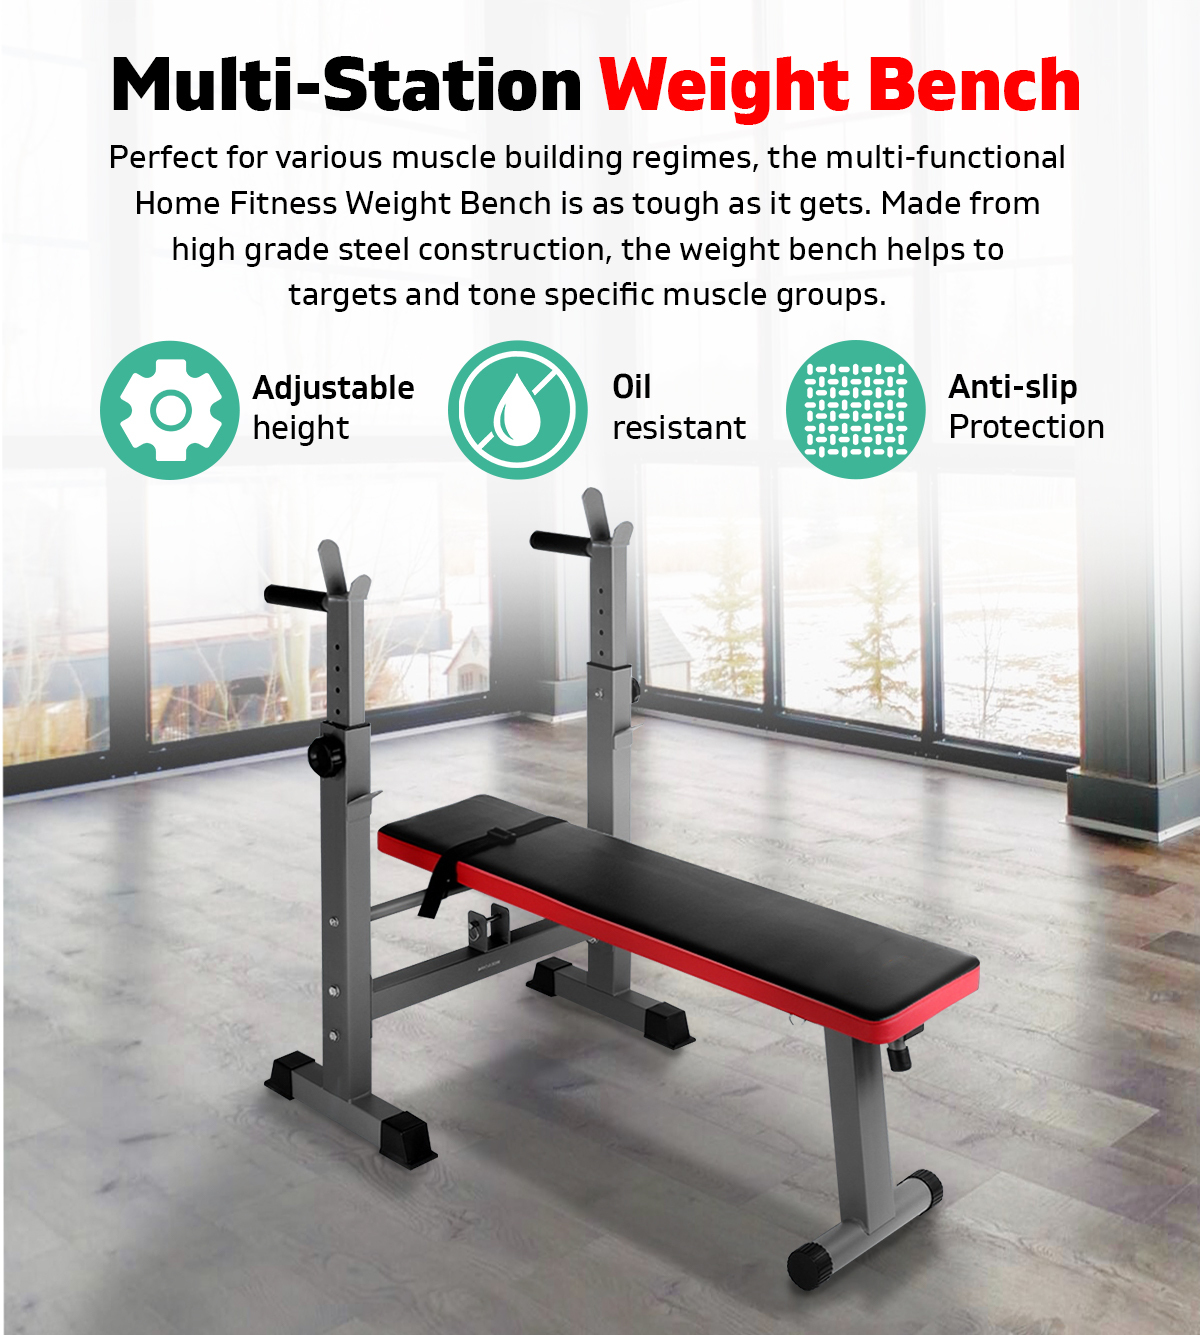 Multi-Station Weight Bench Press Weights Equipment Fitness Workout Home Gym Red